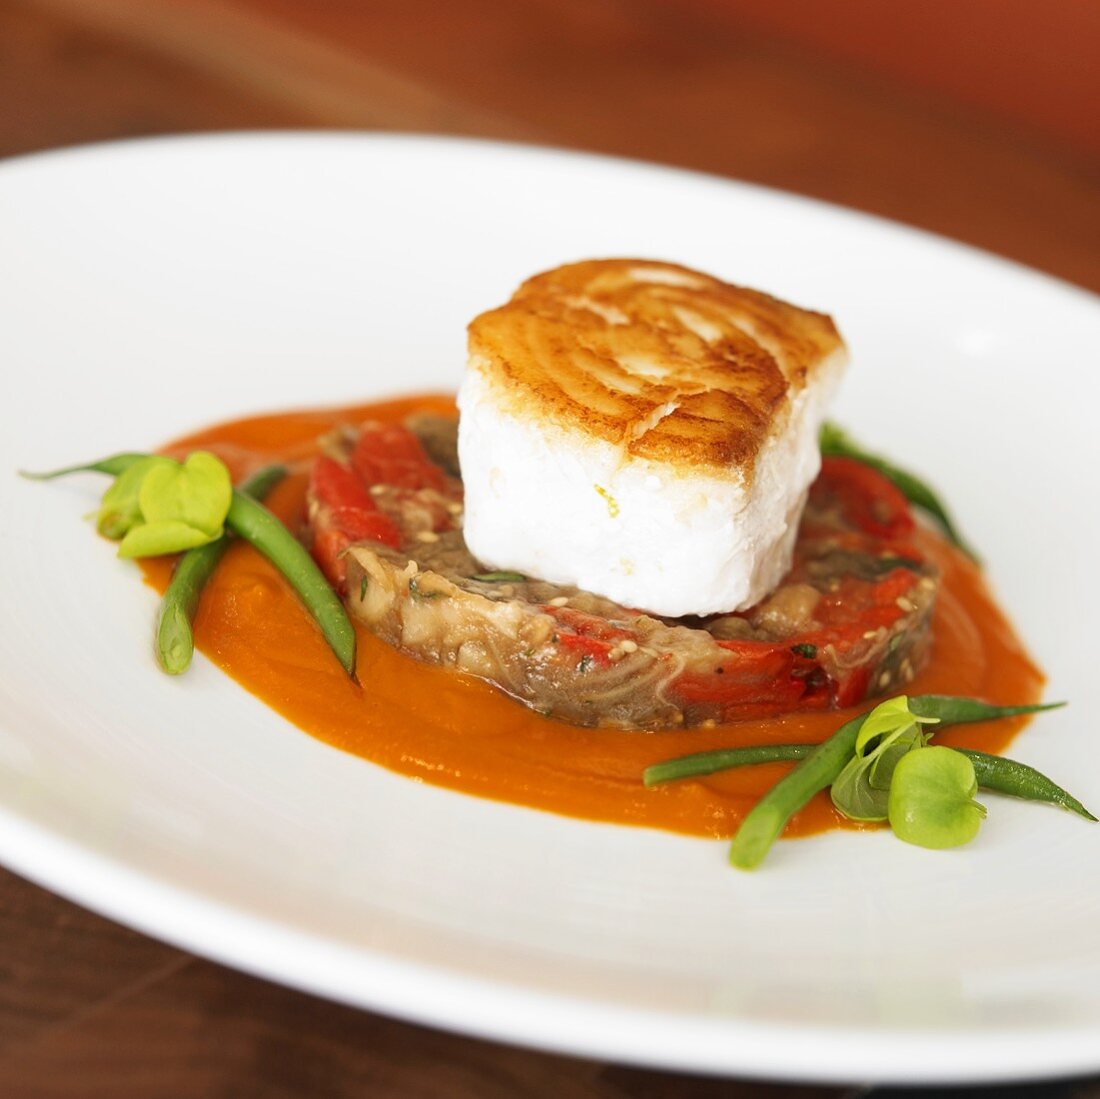 Seared Halibut atop Mixed Vegetable Patty with Tomato Sauce